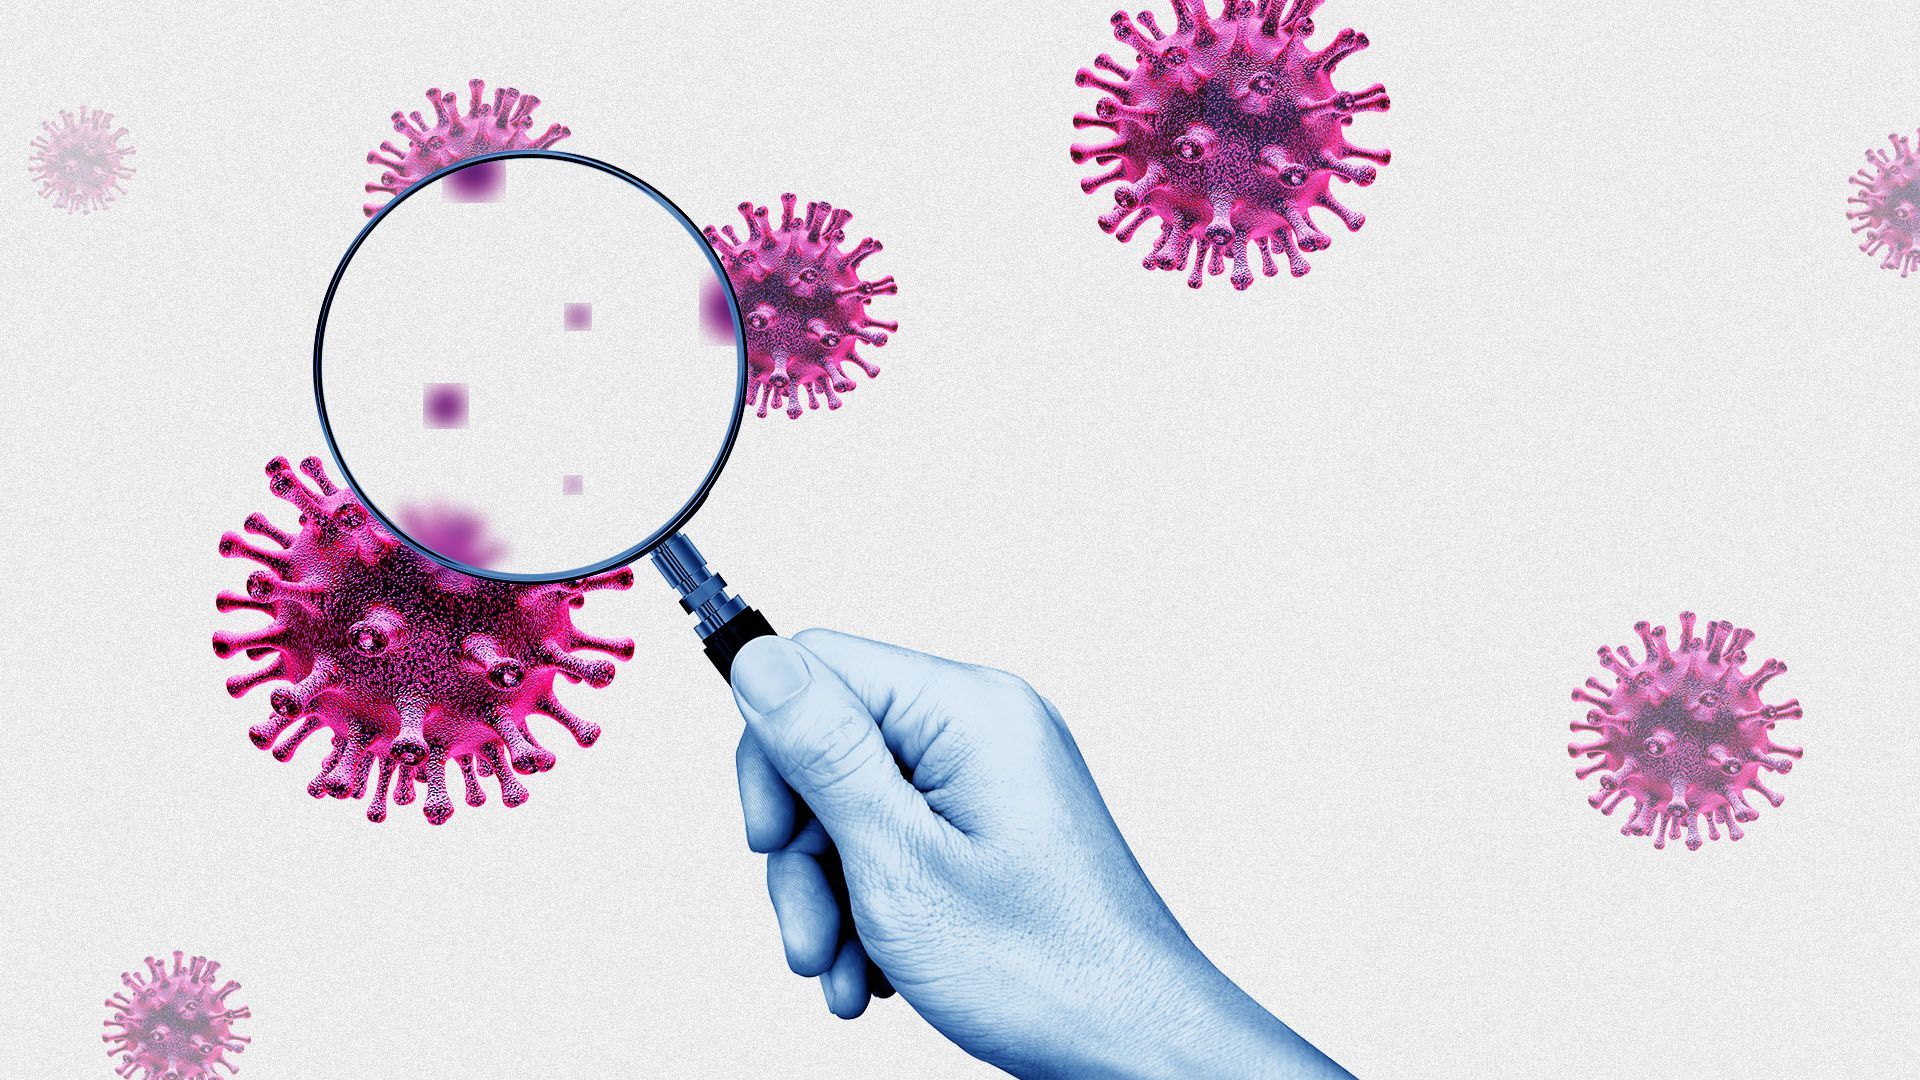 Illustration of viruses under a magnifying glass that appear smaller and more blurry